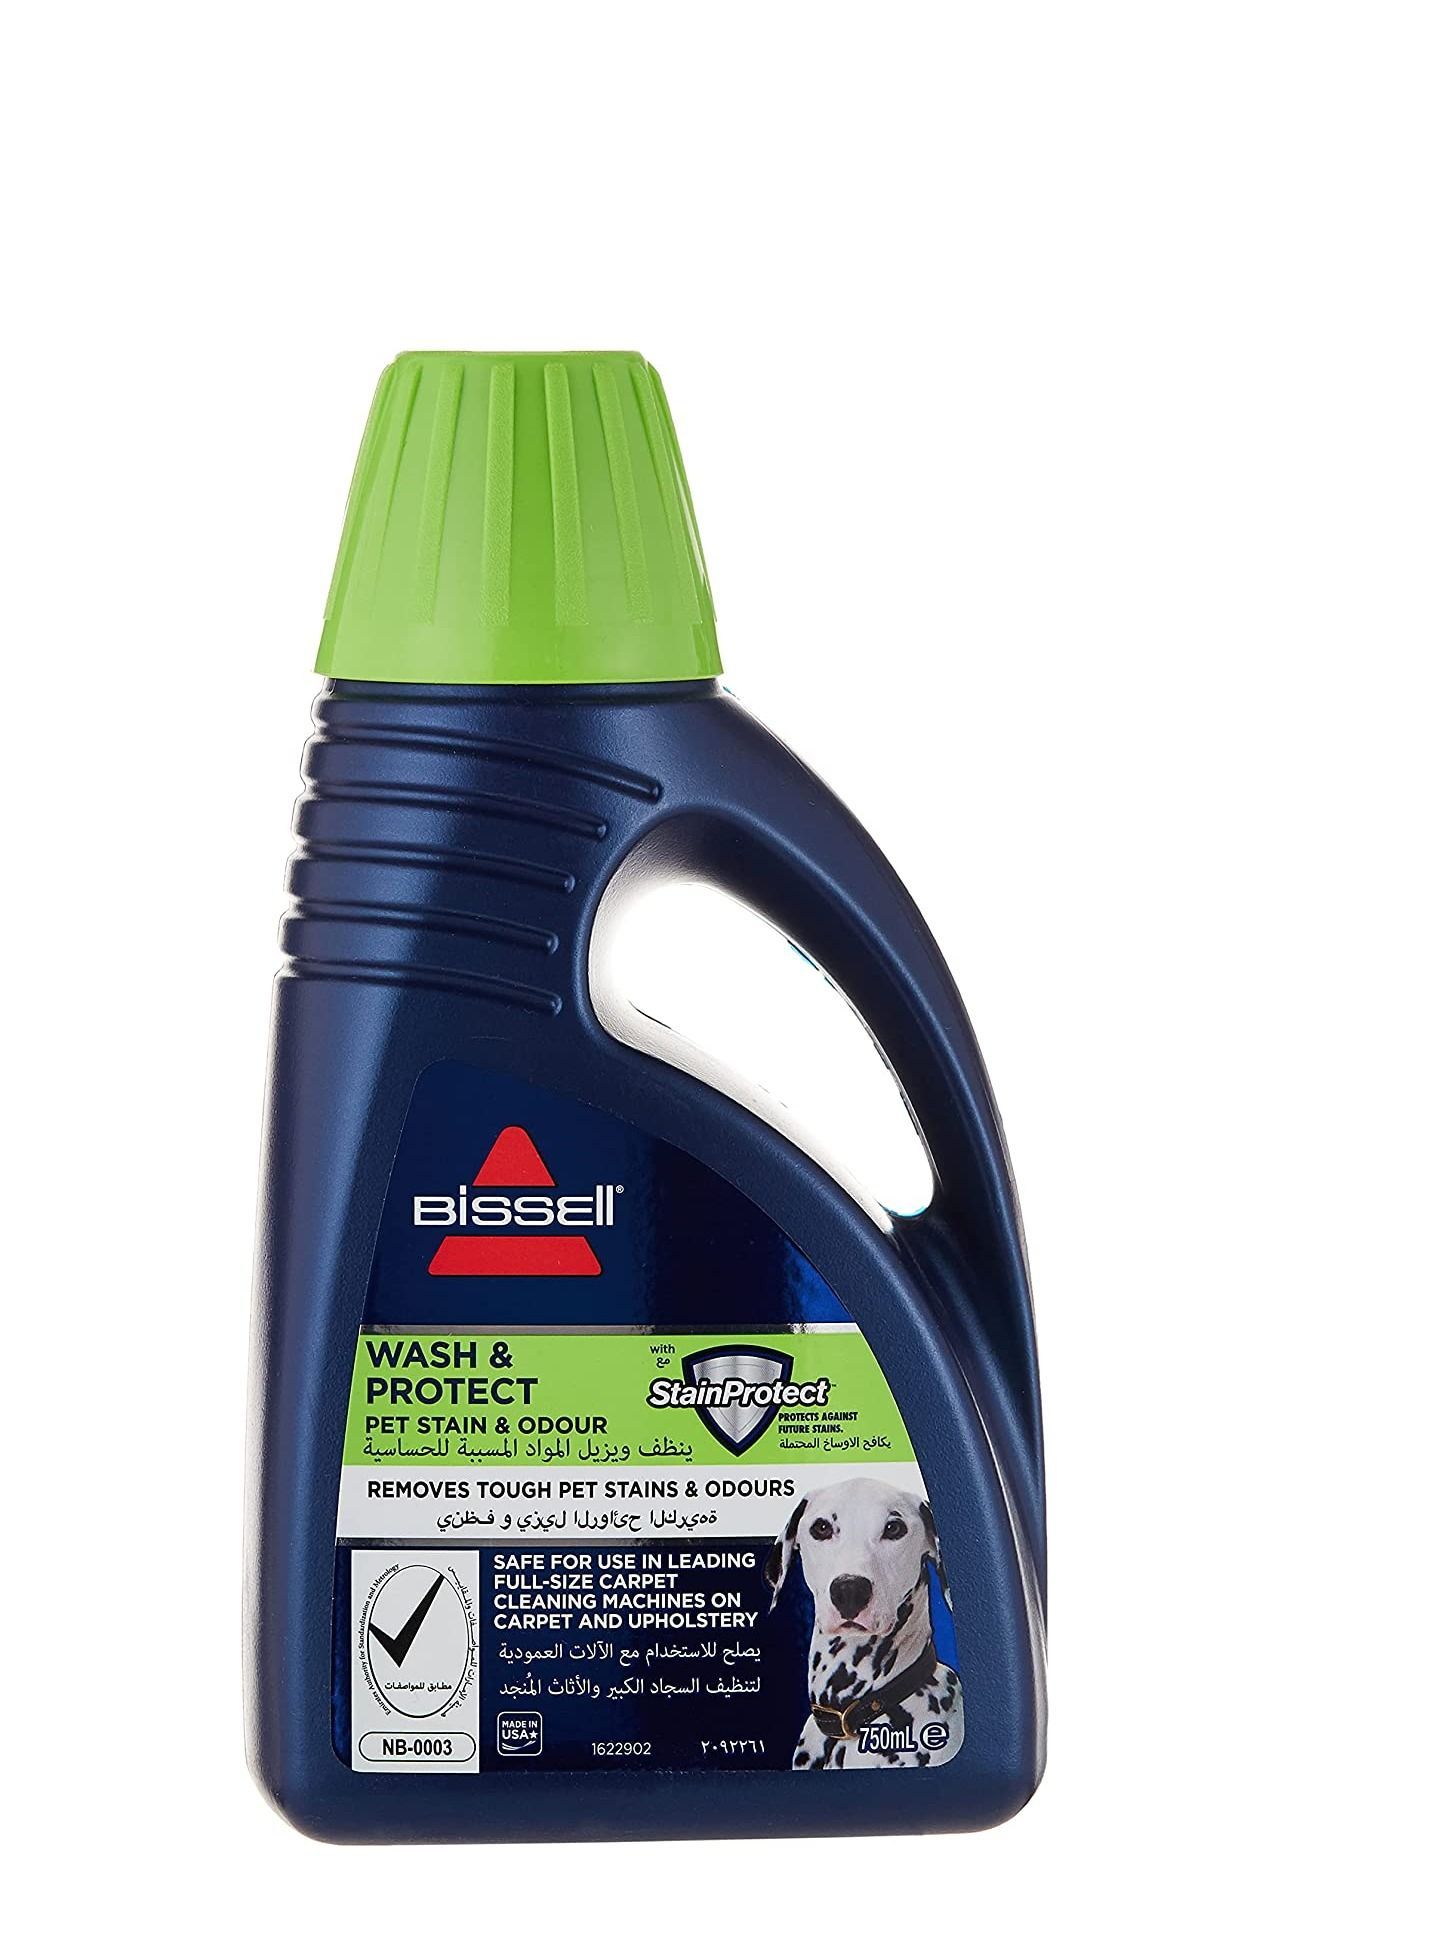 Order BISSELL WASH & PROTECT PET STAIN & ODOUR Now! | Jomla.ae